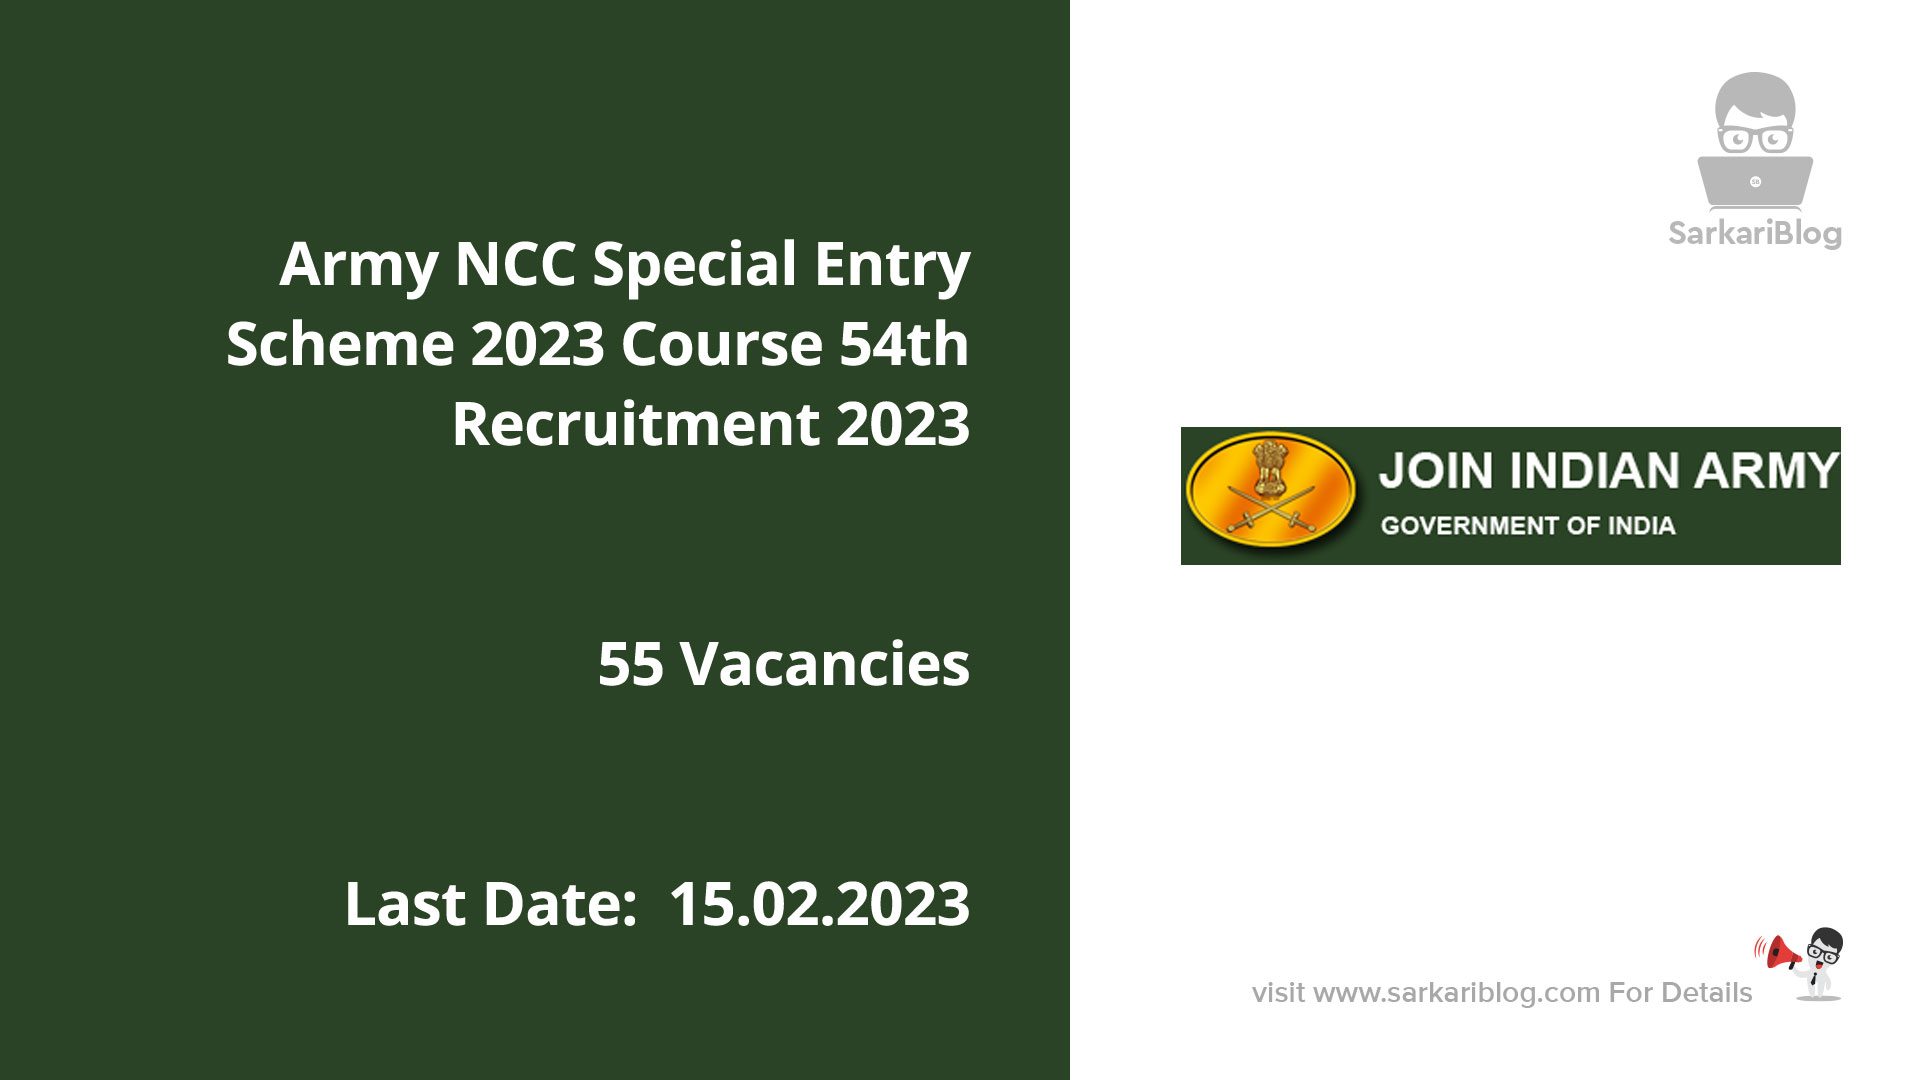 Army NCC Special Entry Scheme 2023 Course 54th